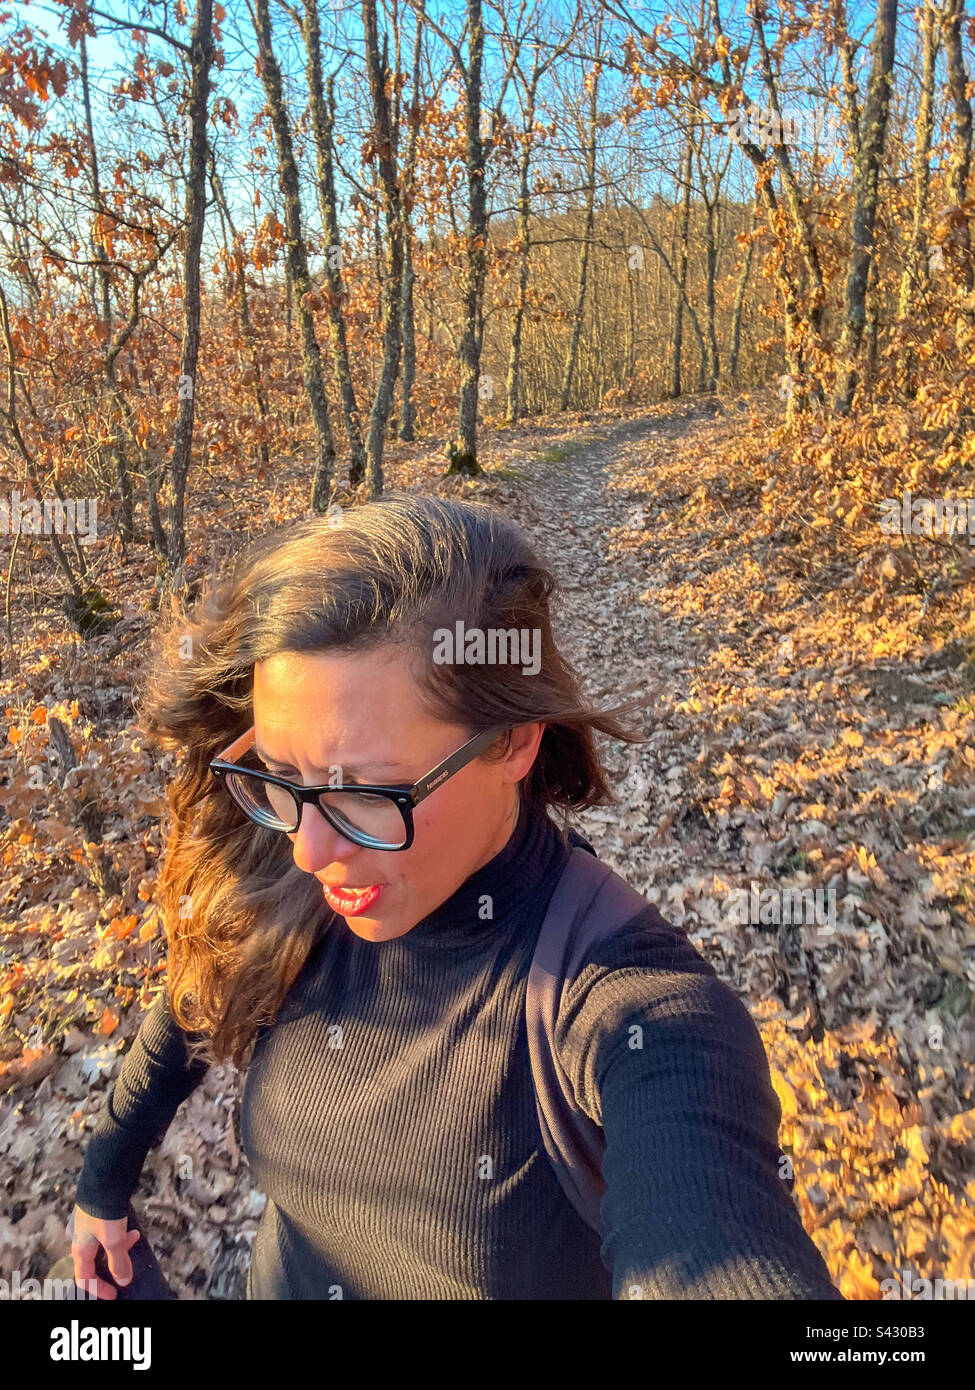 Woman with eyeglasses, long brown hair, brown skin and a black turtleneck shirt walking, hiking on a trail with dry leaves, in the autumn, during golden hour. Sun reflecting at the leaves and blue sky Stock Photo